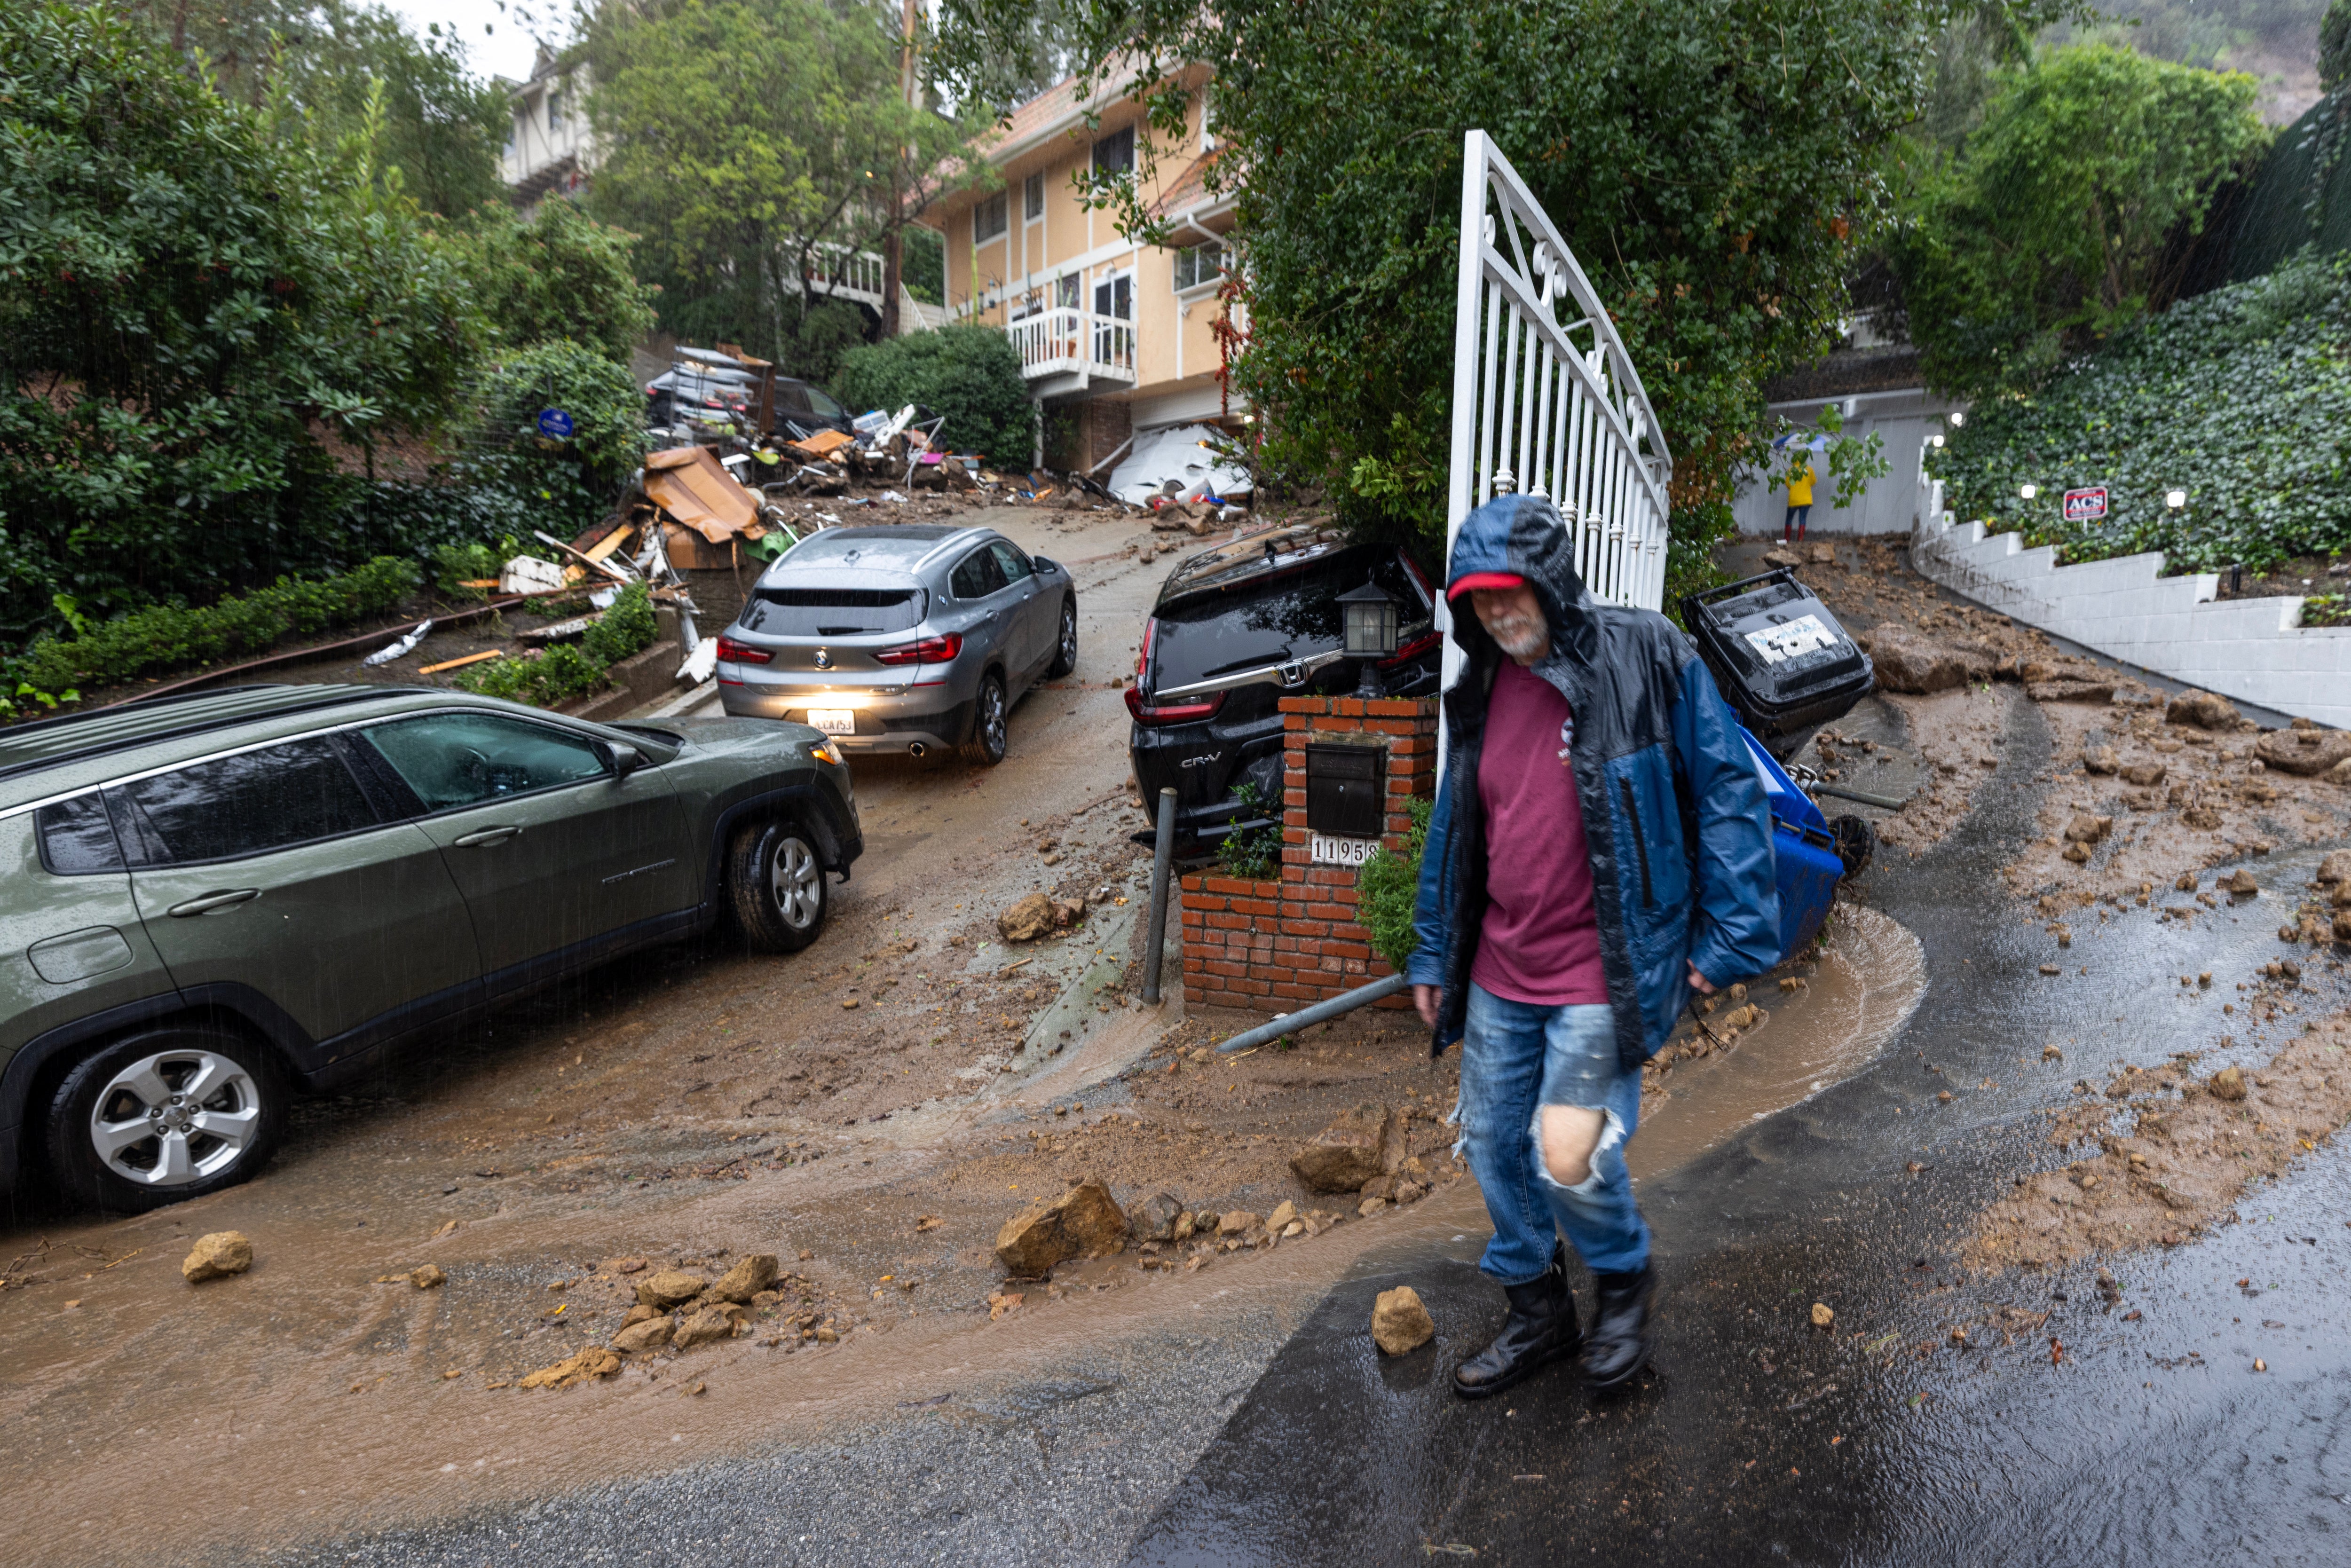 A man and several cars sit outside a home damaged by mudslides in Los Angeles, California on Monday